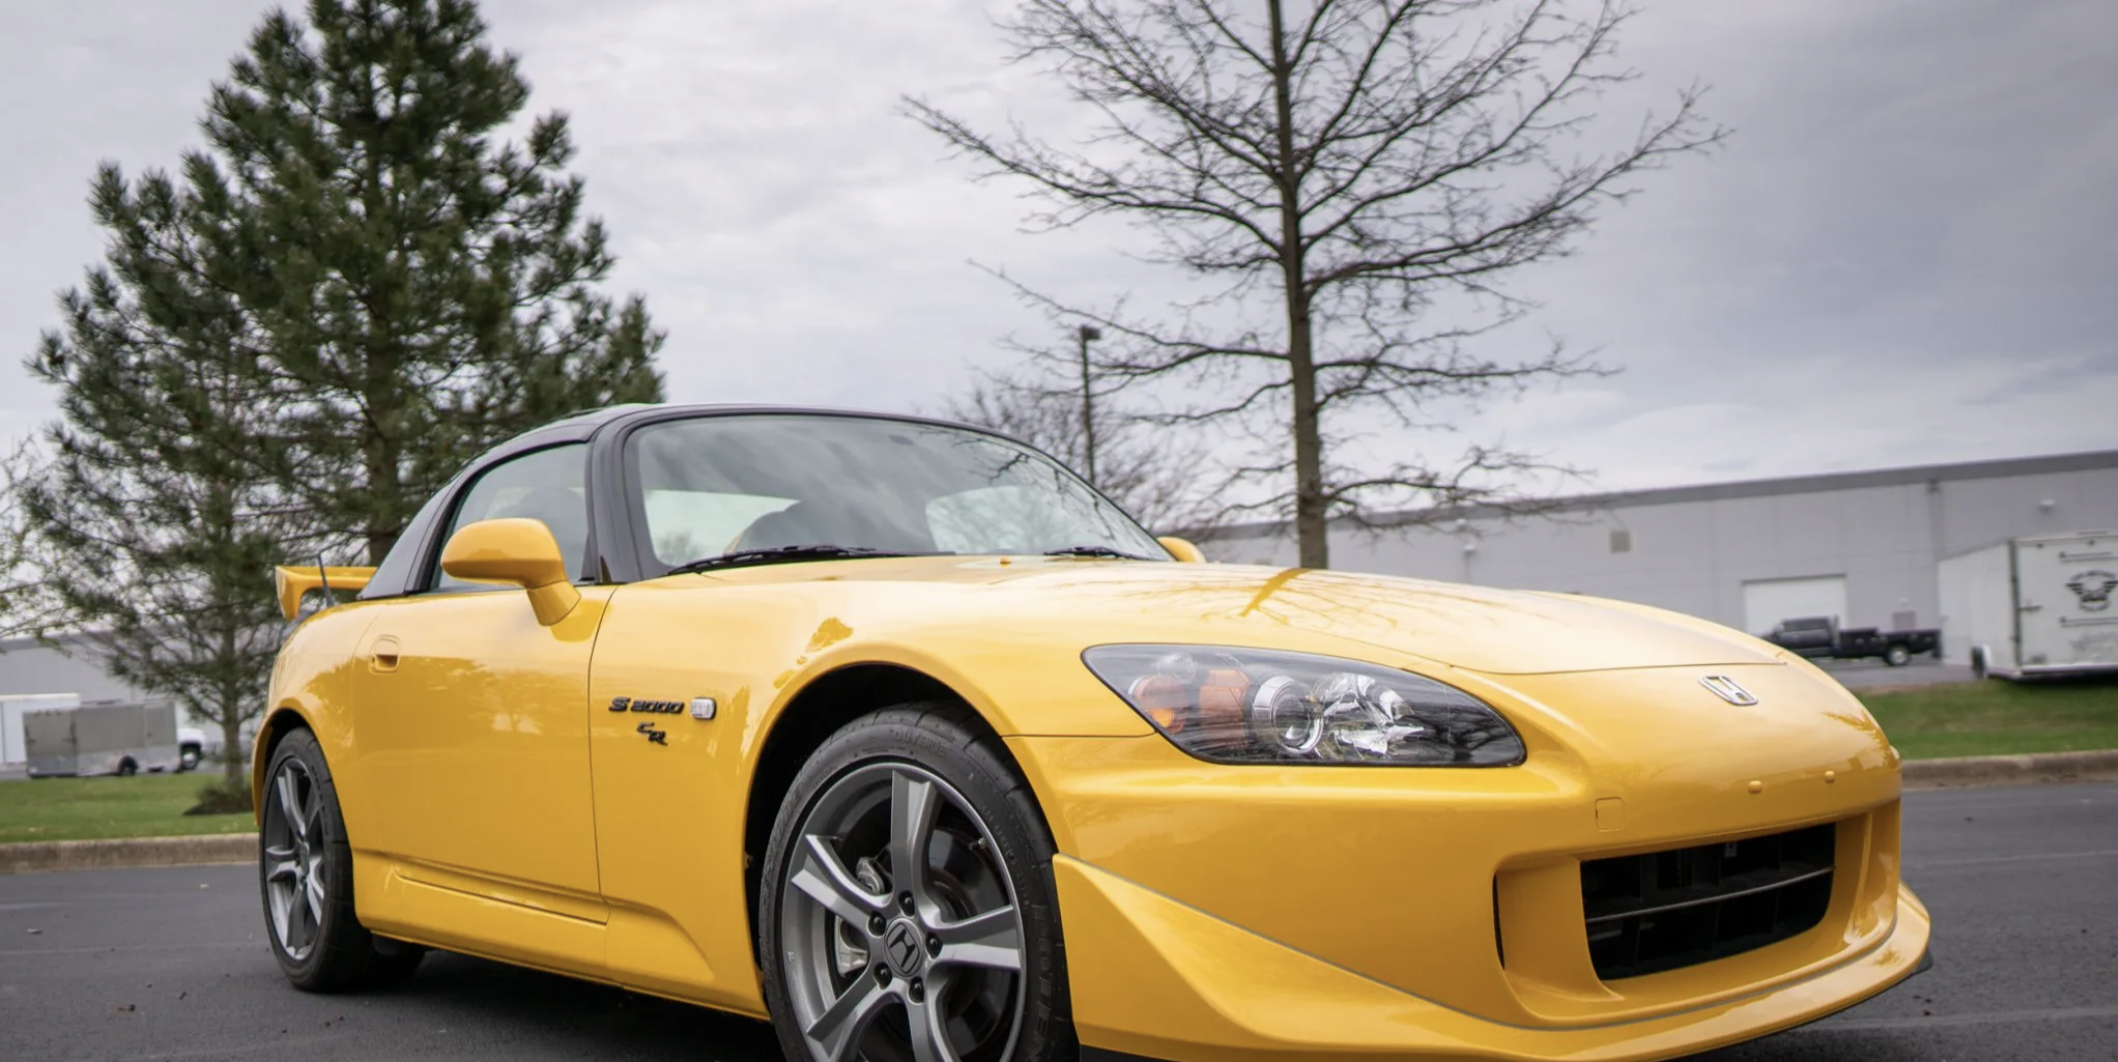 IndyCar Racer Knows Cars: Graham Rahal Is Selling His Flawless 123-Mile Honda S2000 CR